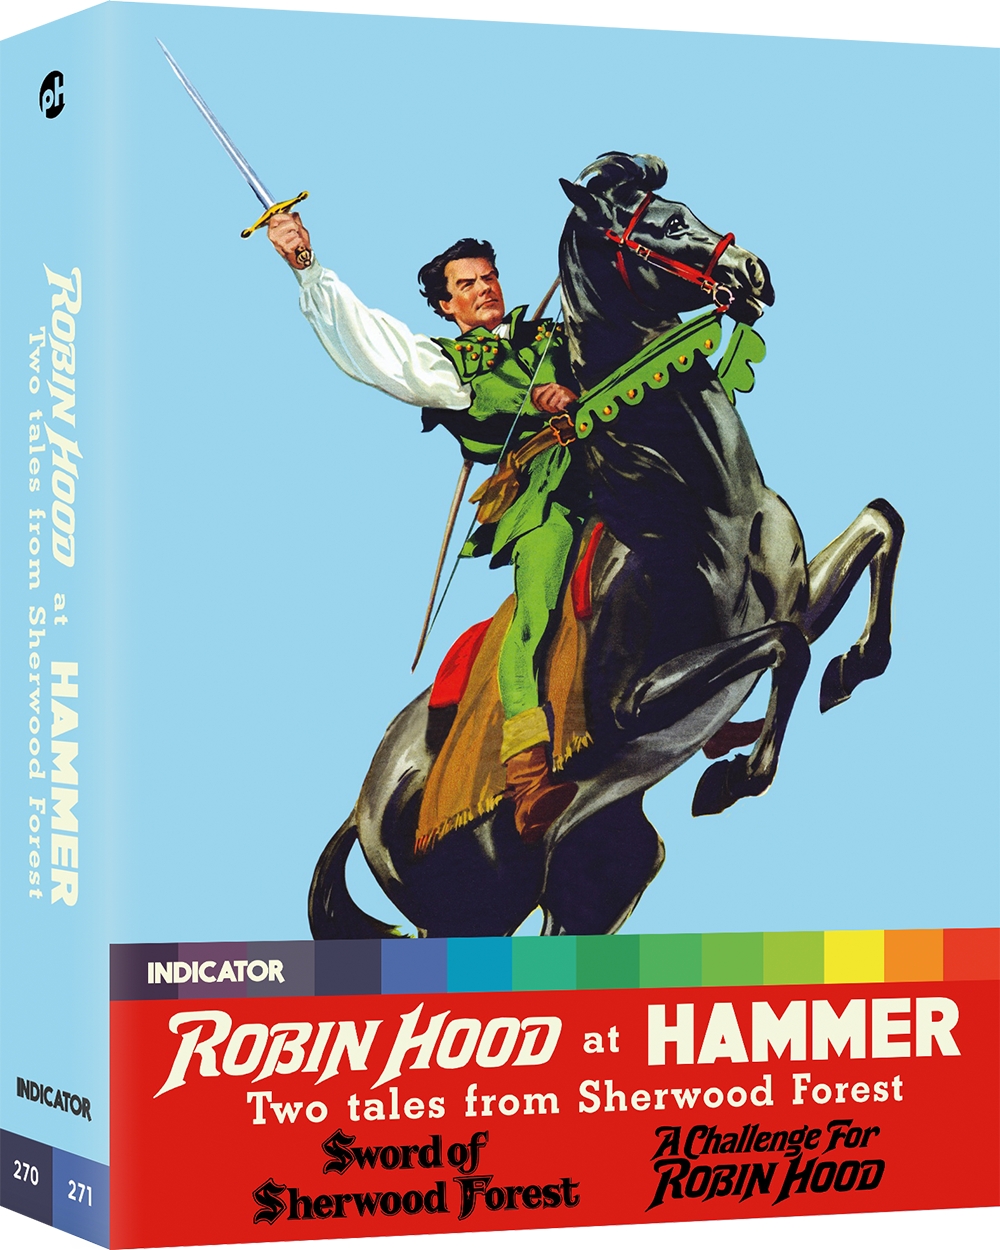 ROBIN HOOD AT HAMMER: TWO TALES FROM SHERWOOD FOREST - LE